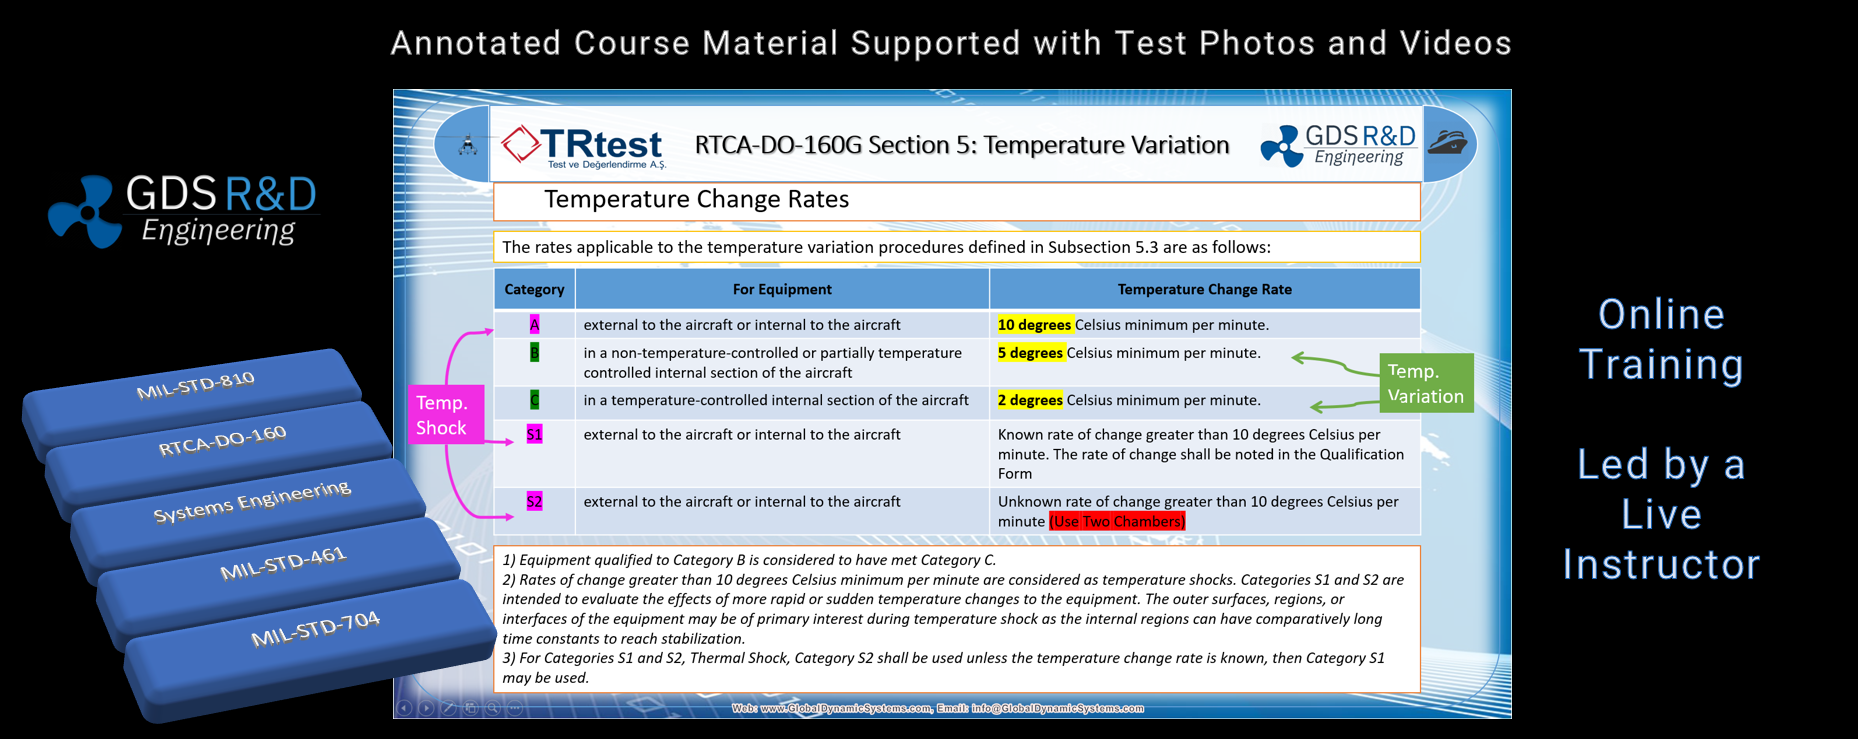 Online Training on MIL-STD-810H, RTCA-DO-160, MIL-STD-461G Environmental Testing of Products, provided by GDS Engineering R&D, Systems Engineering Products and Solutions. Training Led by a Live US-based Sr. Instructor.